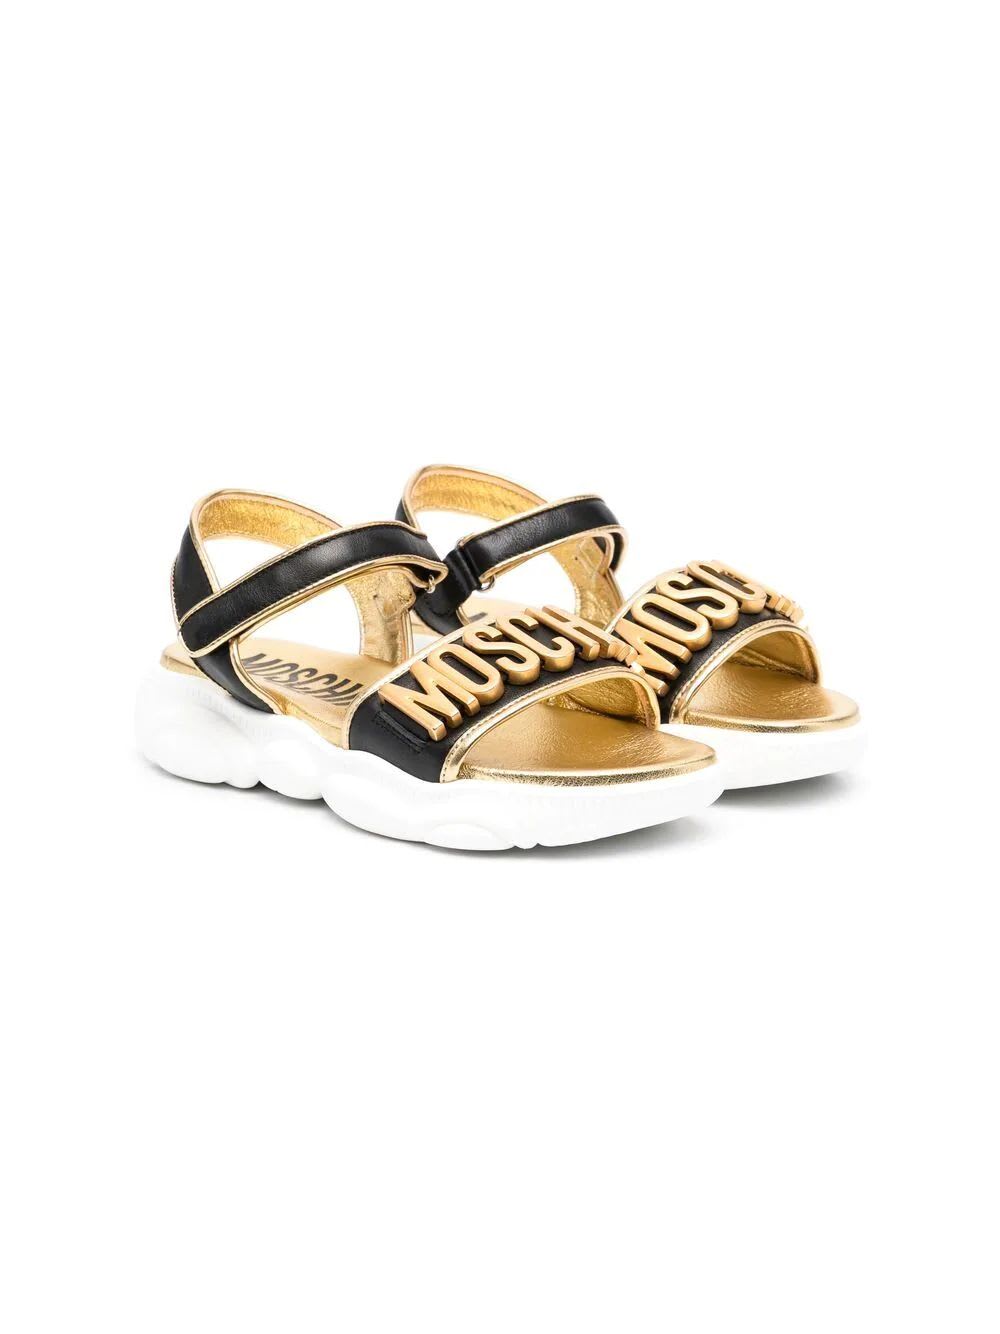 Buy Moschino Sandals With Application online, shop Moschino shoes with free shipping